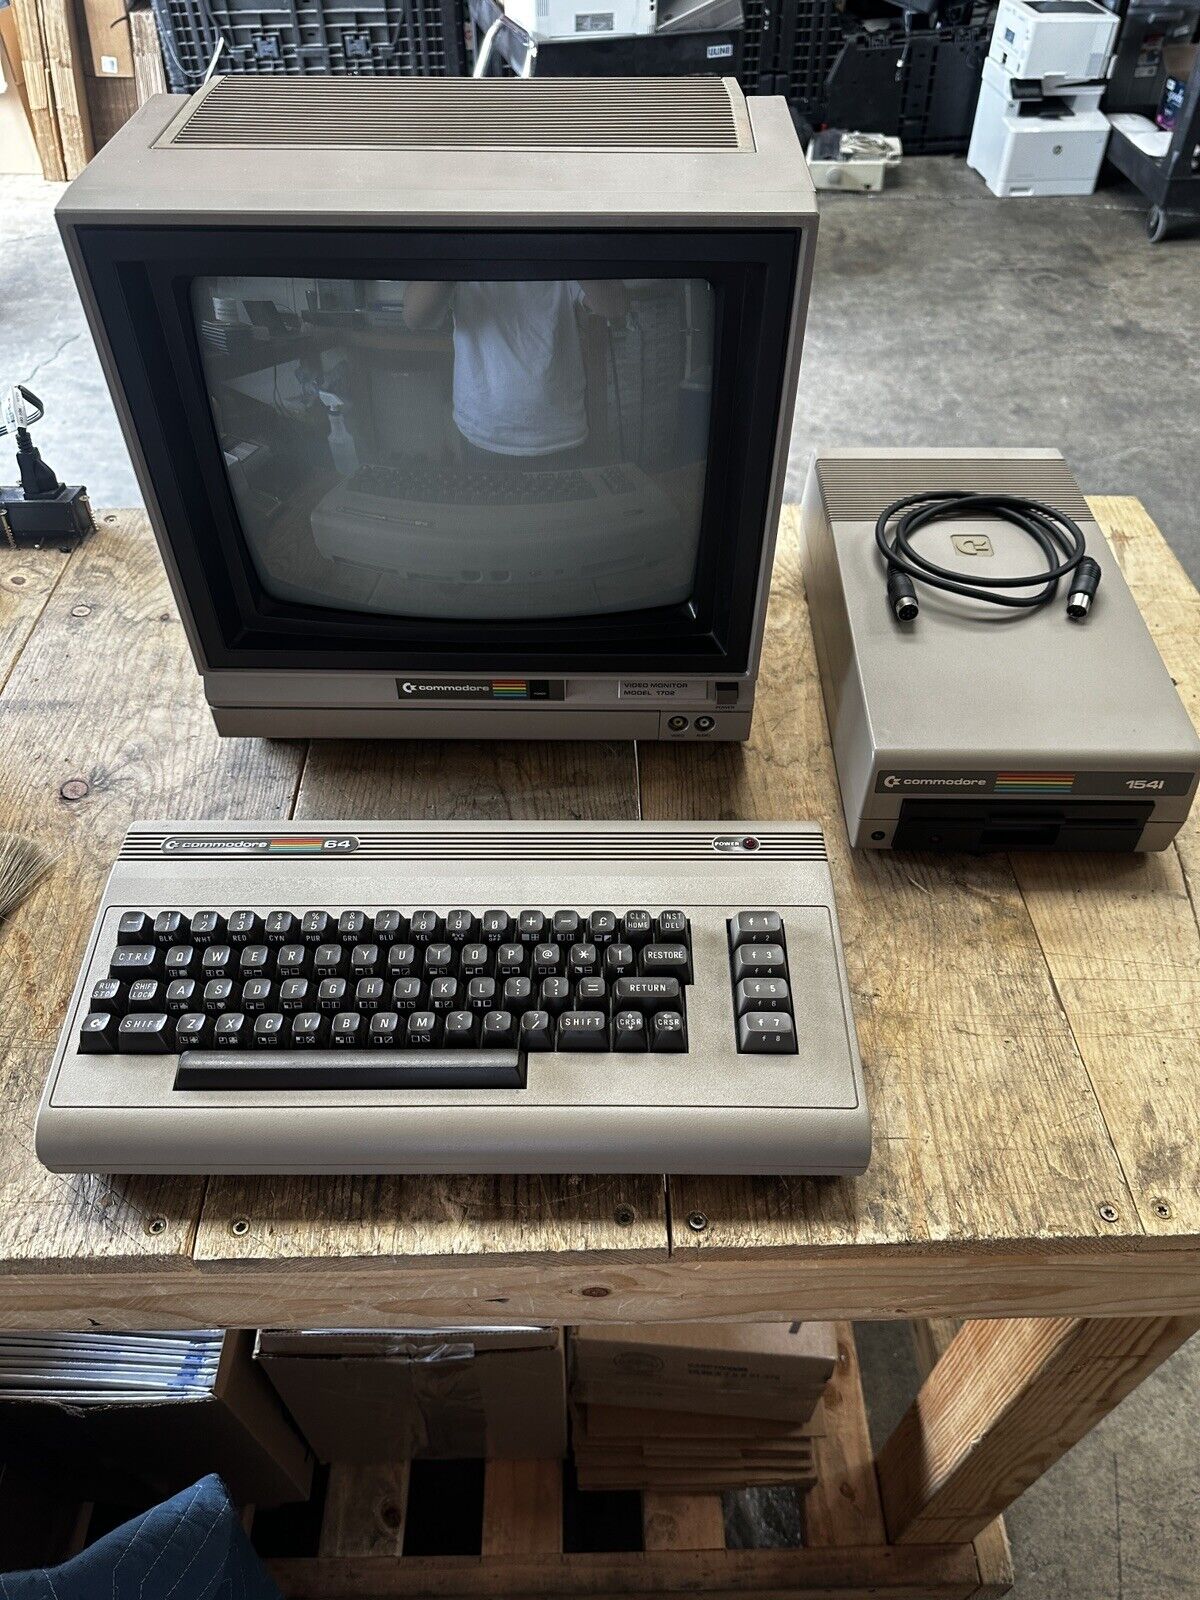 LOT - Commodore 64, Video Monitor 1702, Commodore 1541 + Lots Of Extras WORKING